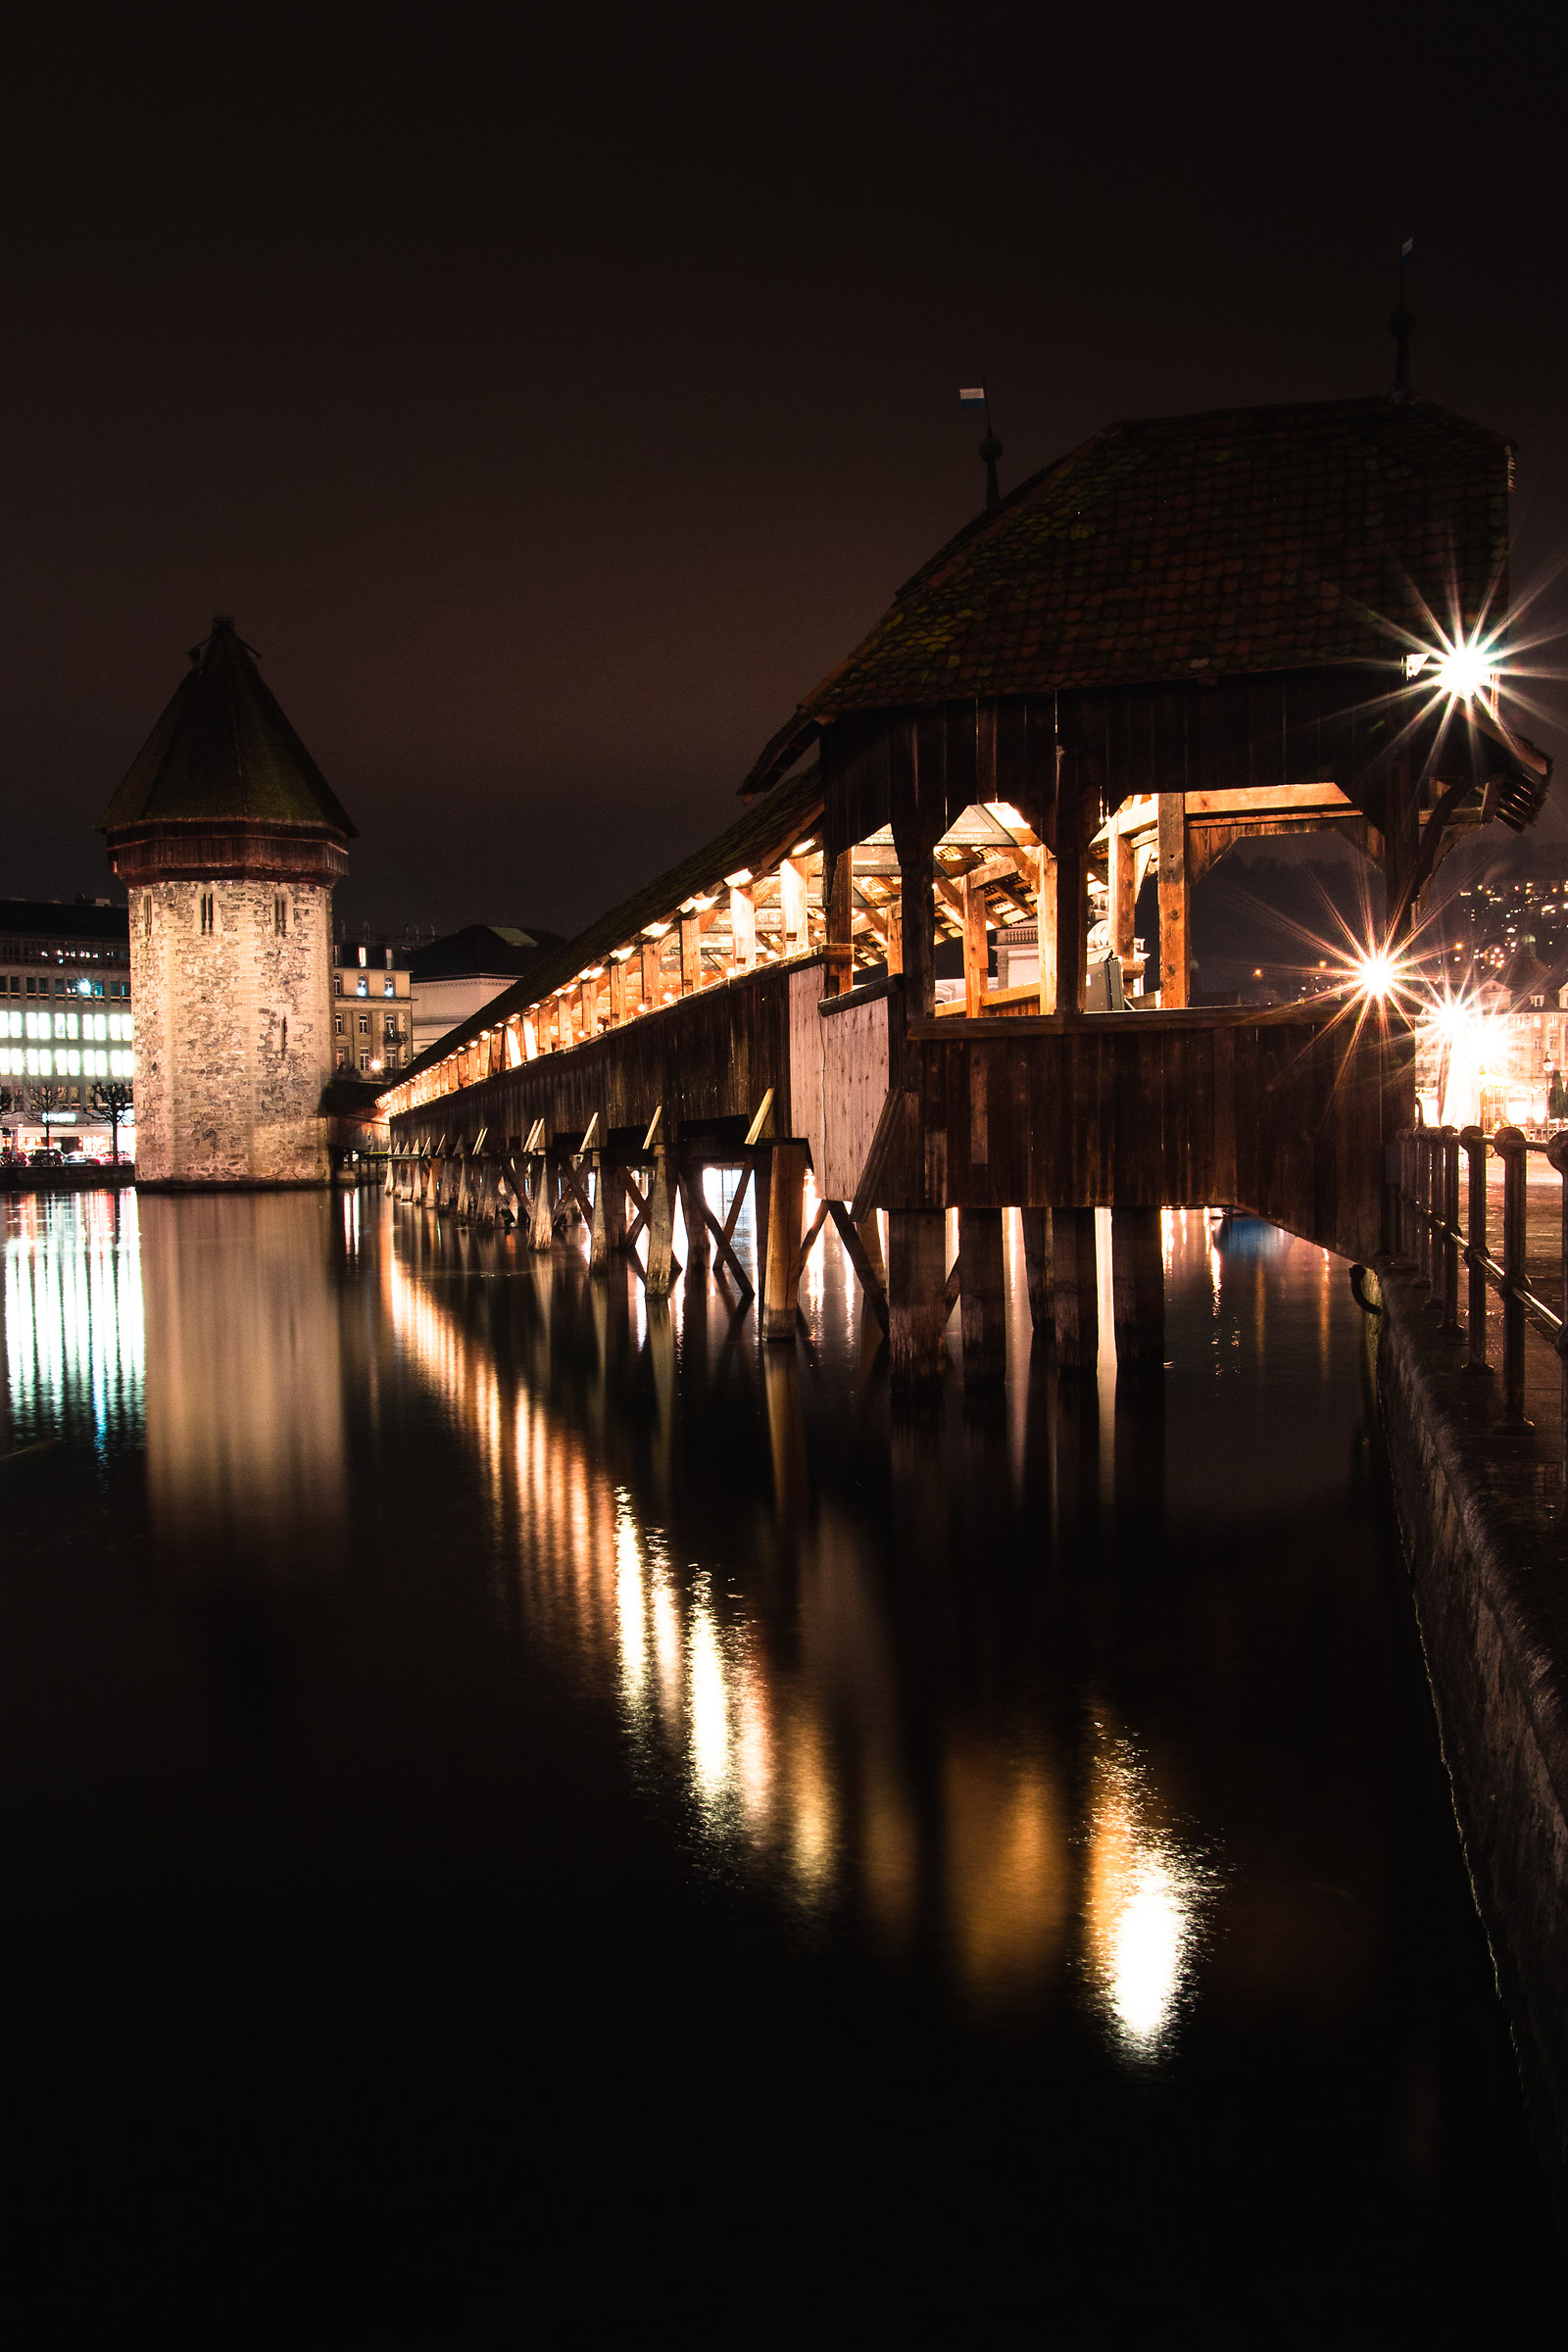 Cold night in Lucerne...